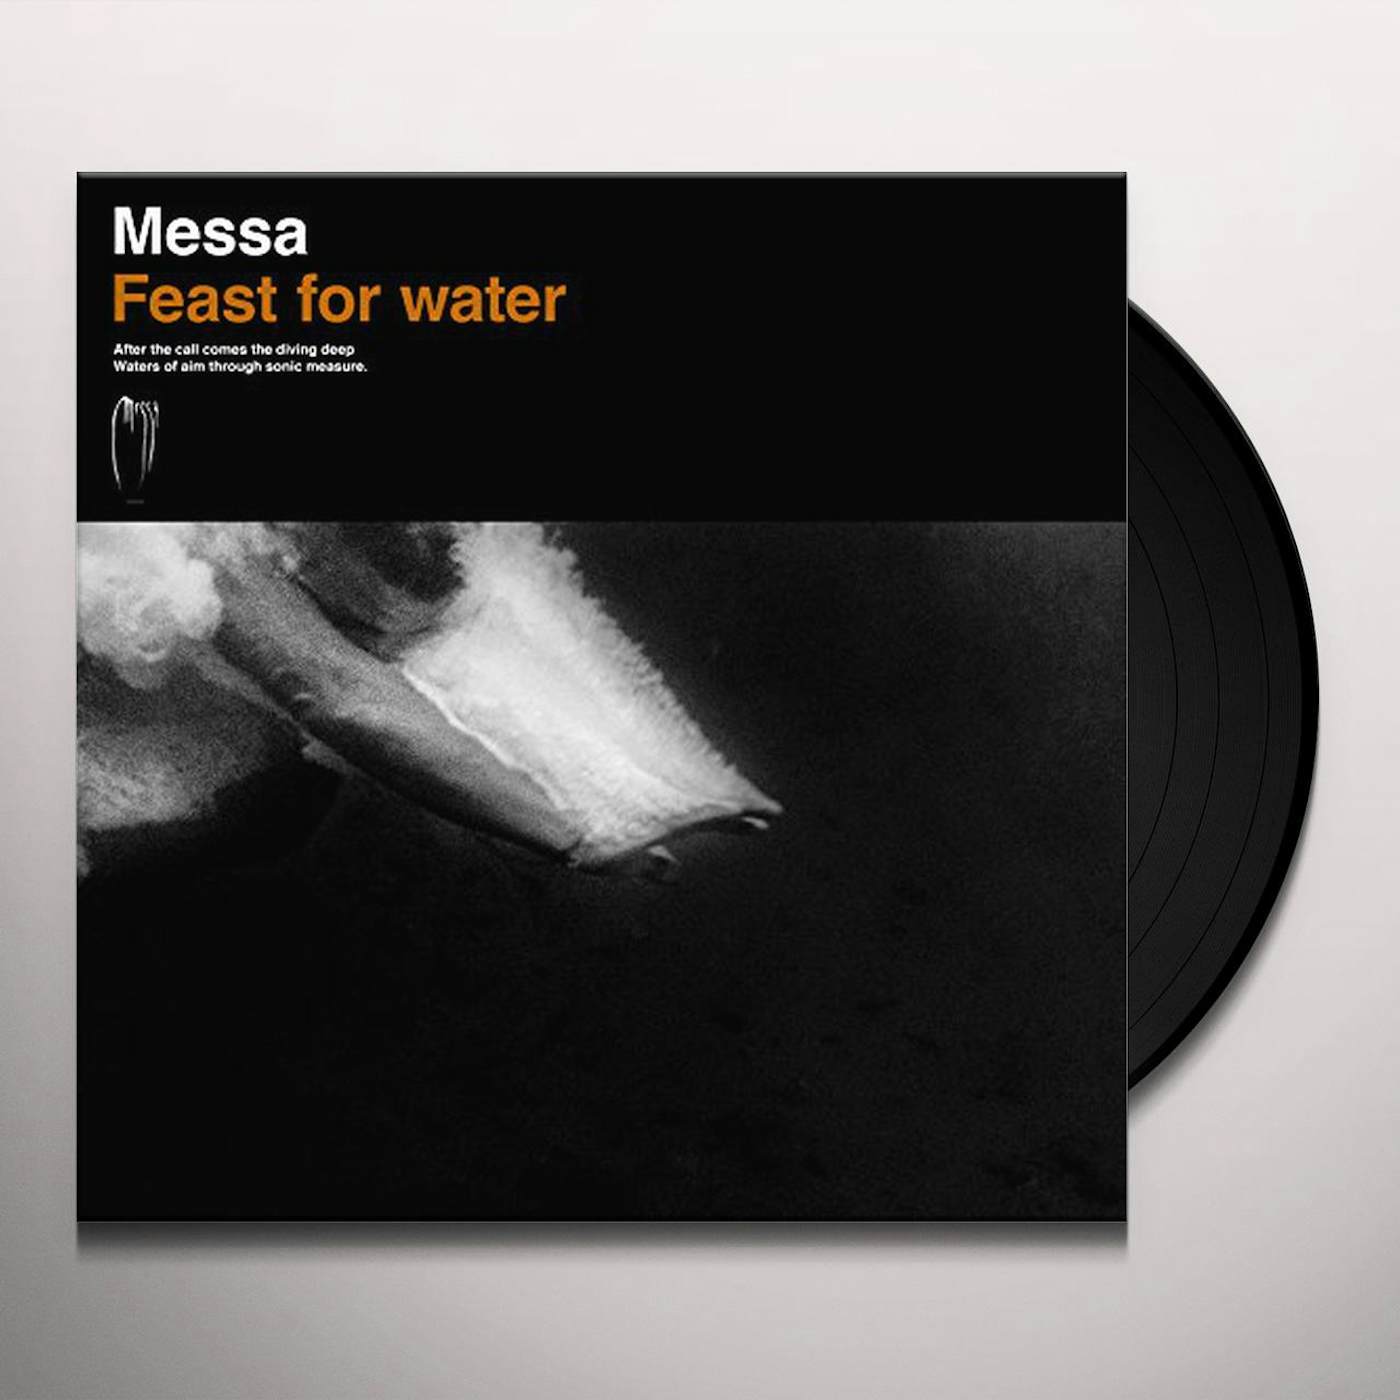 Messa Feast for Water Vinyl Record